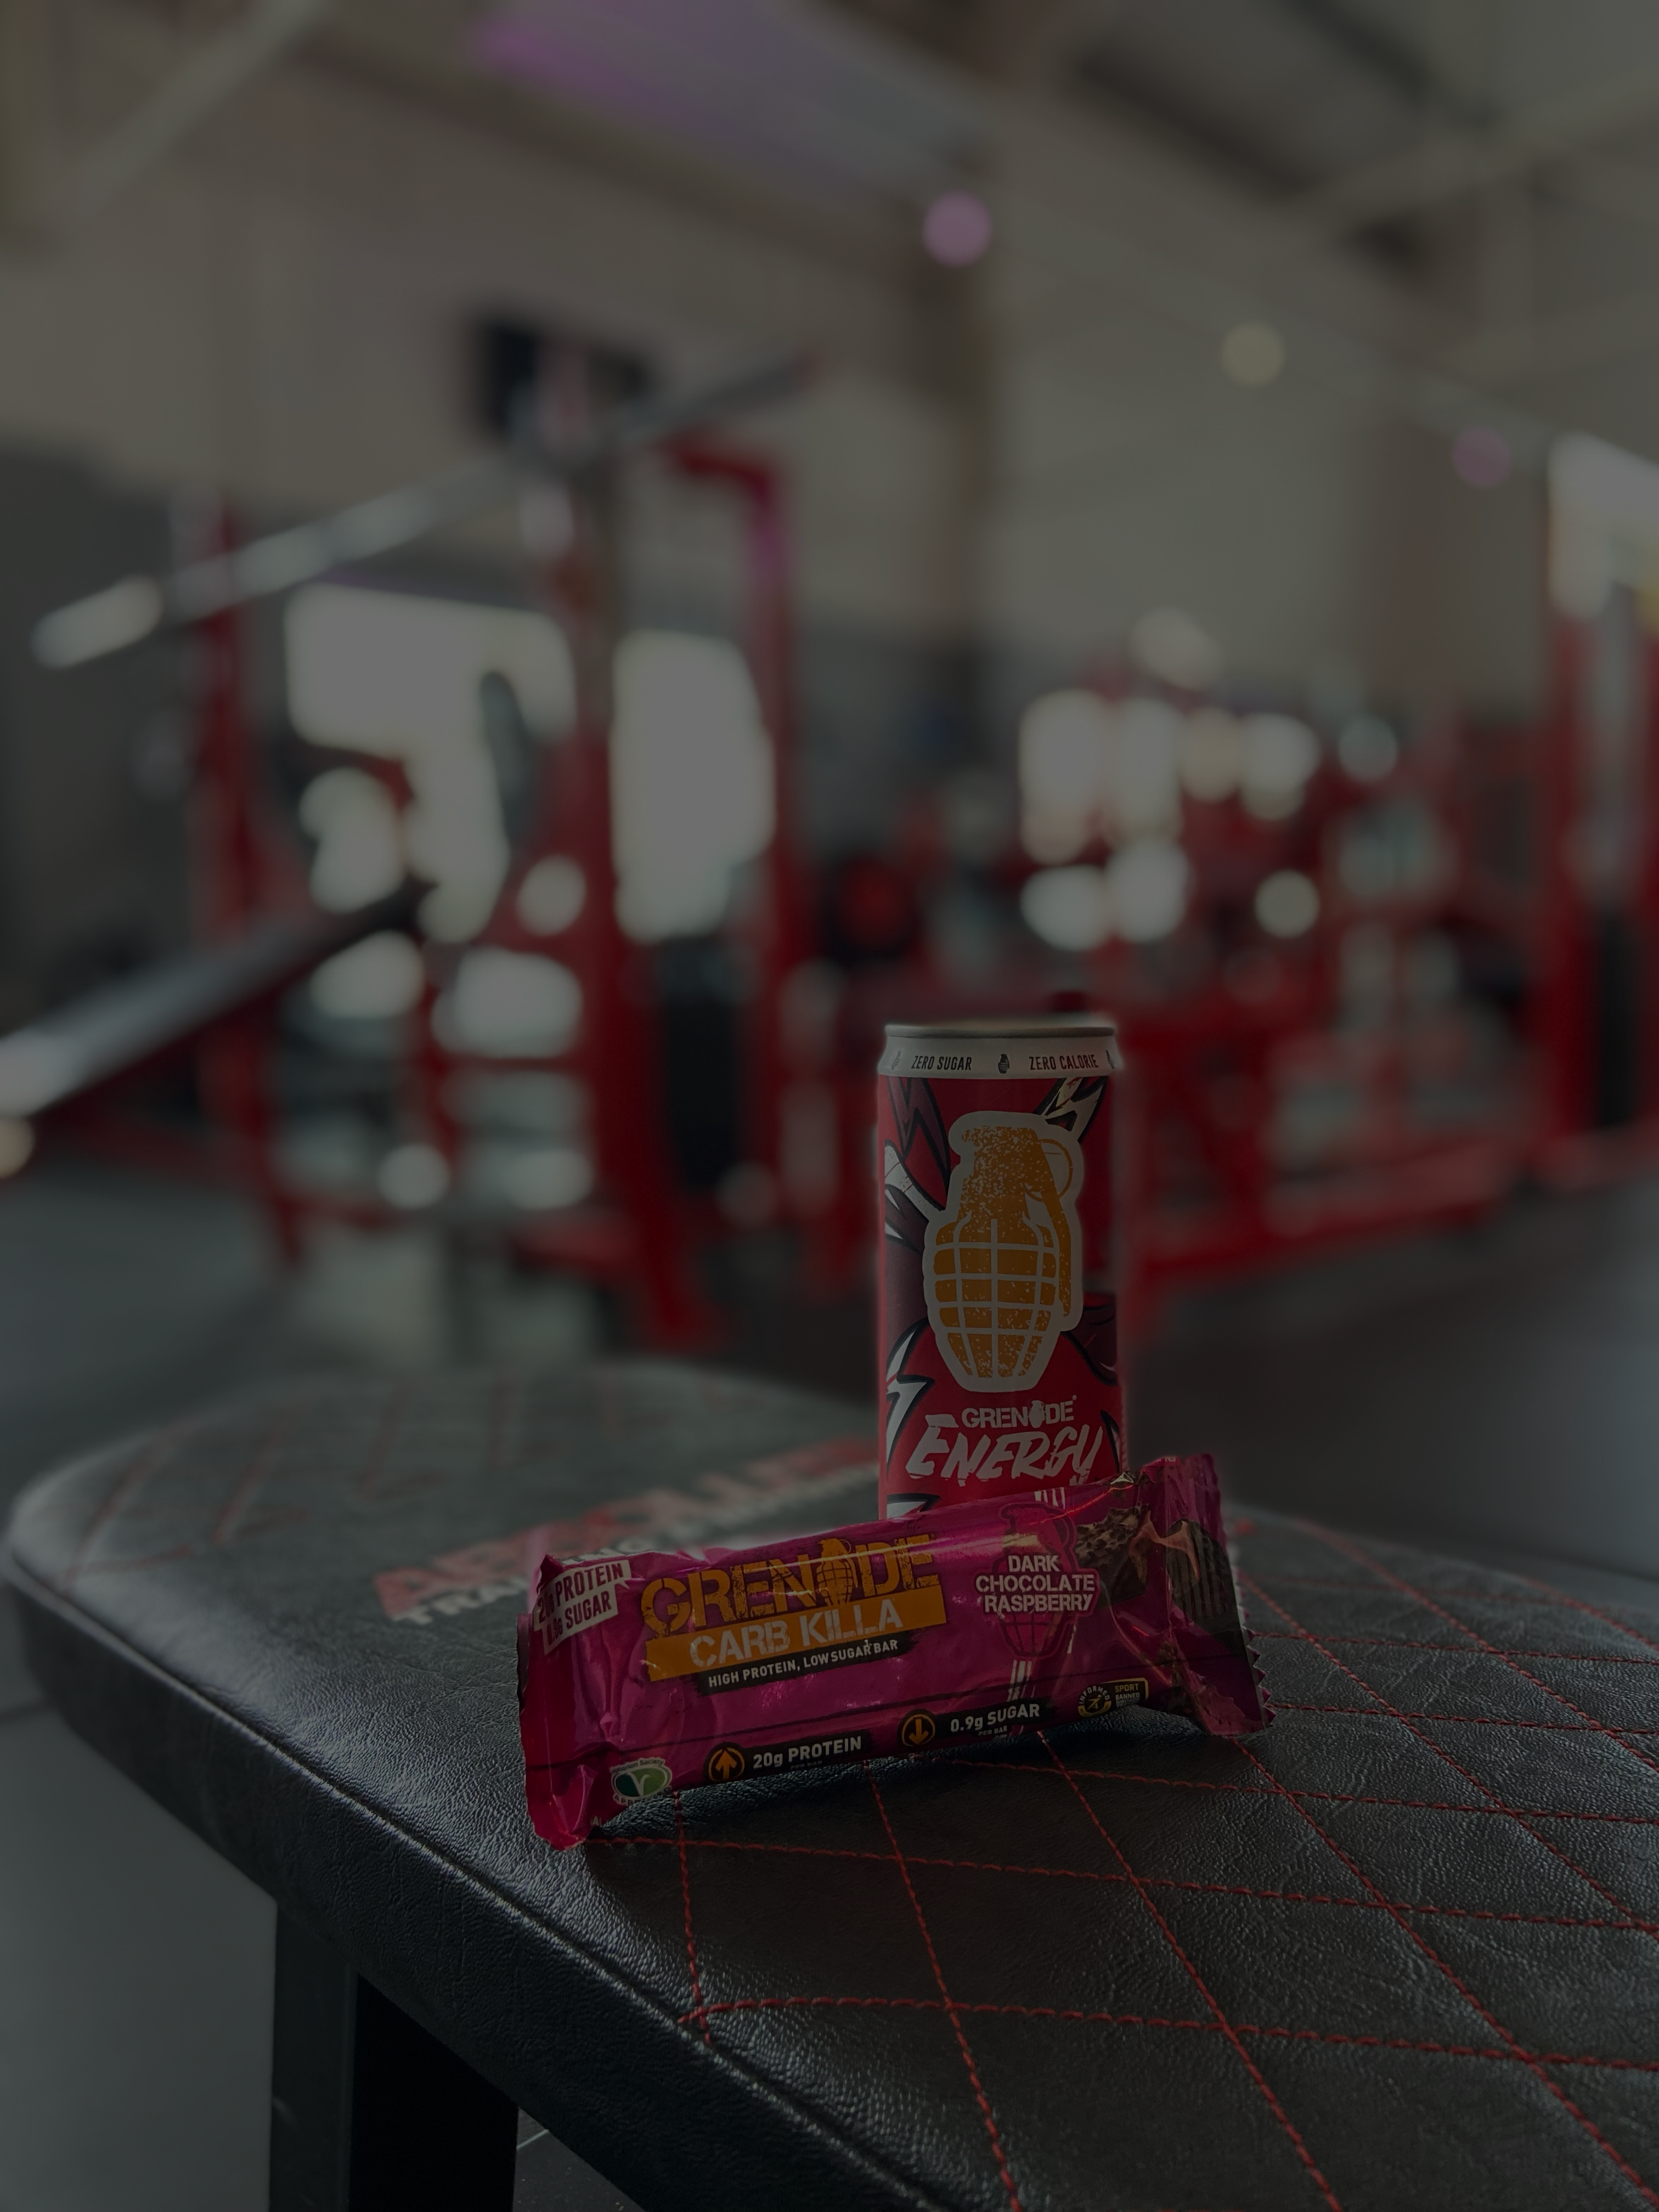 An energy drink and protein bar in the gym